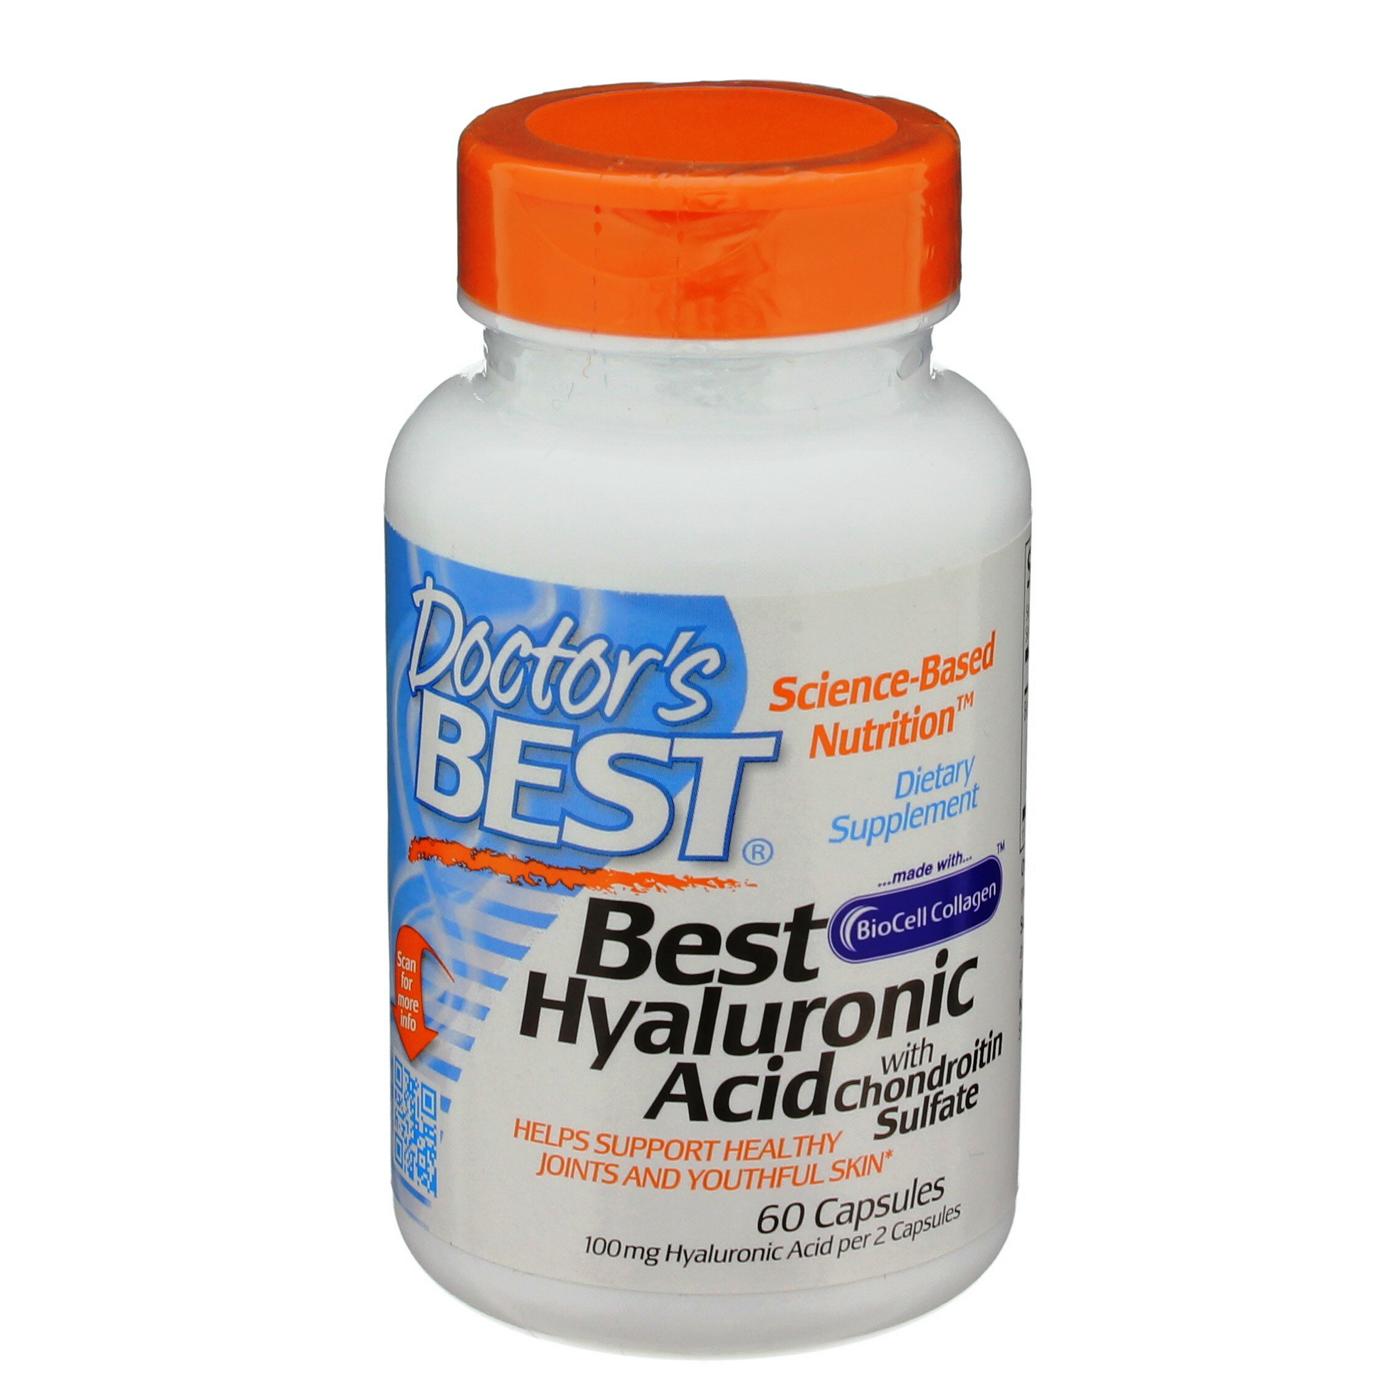 Doctor's Best Hyaluronic Acid With Chondroitin Sulfate Capsules; image 1 of 2